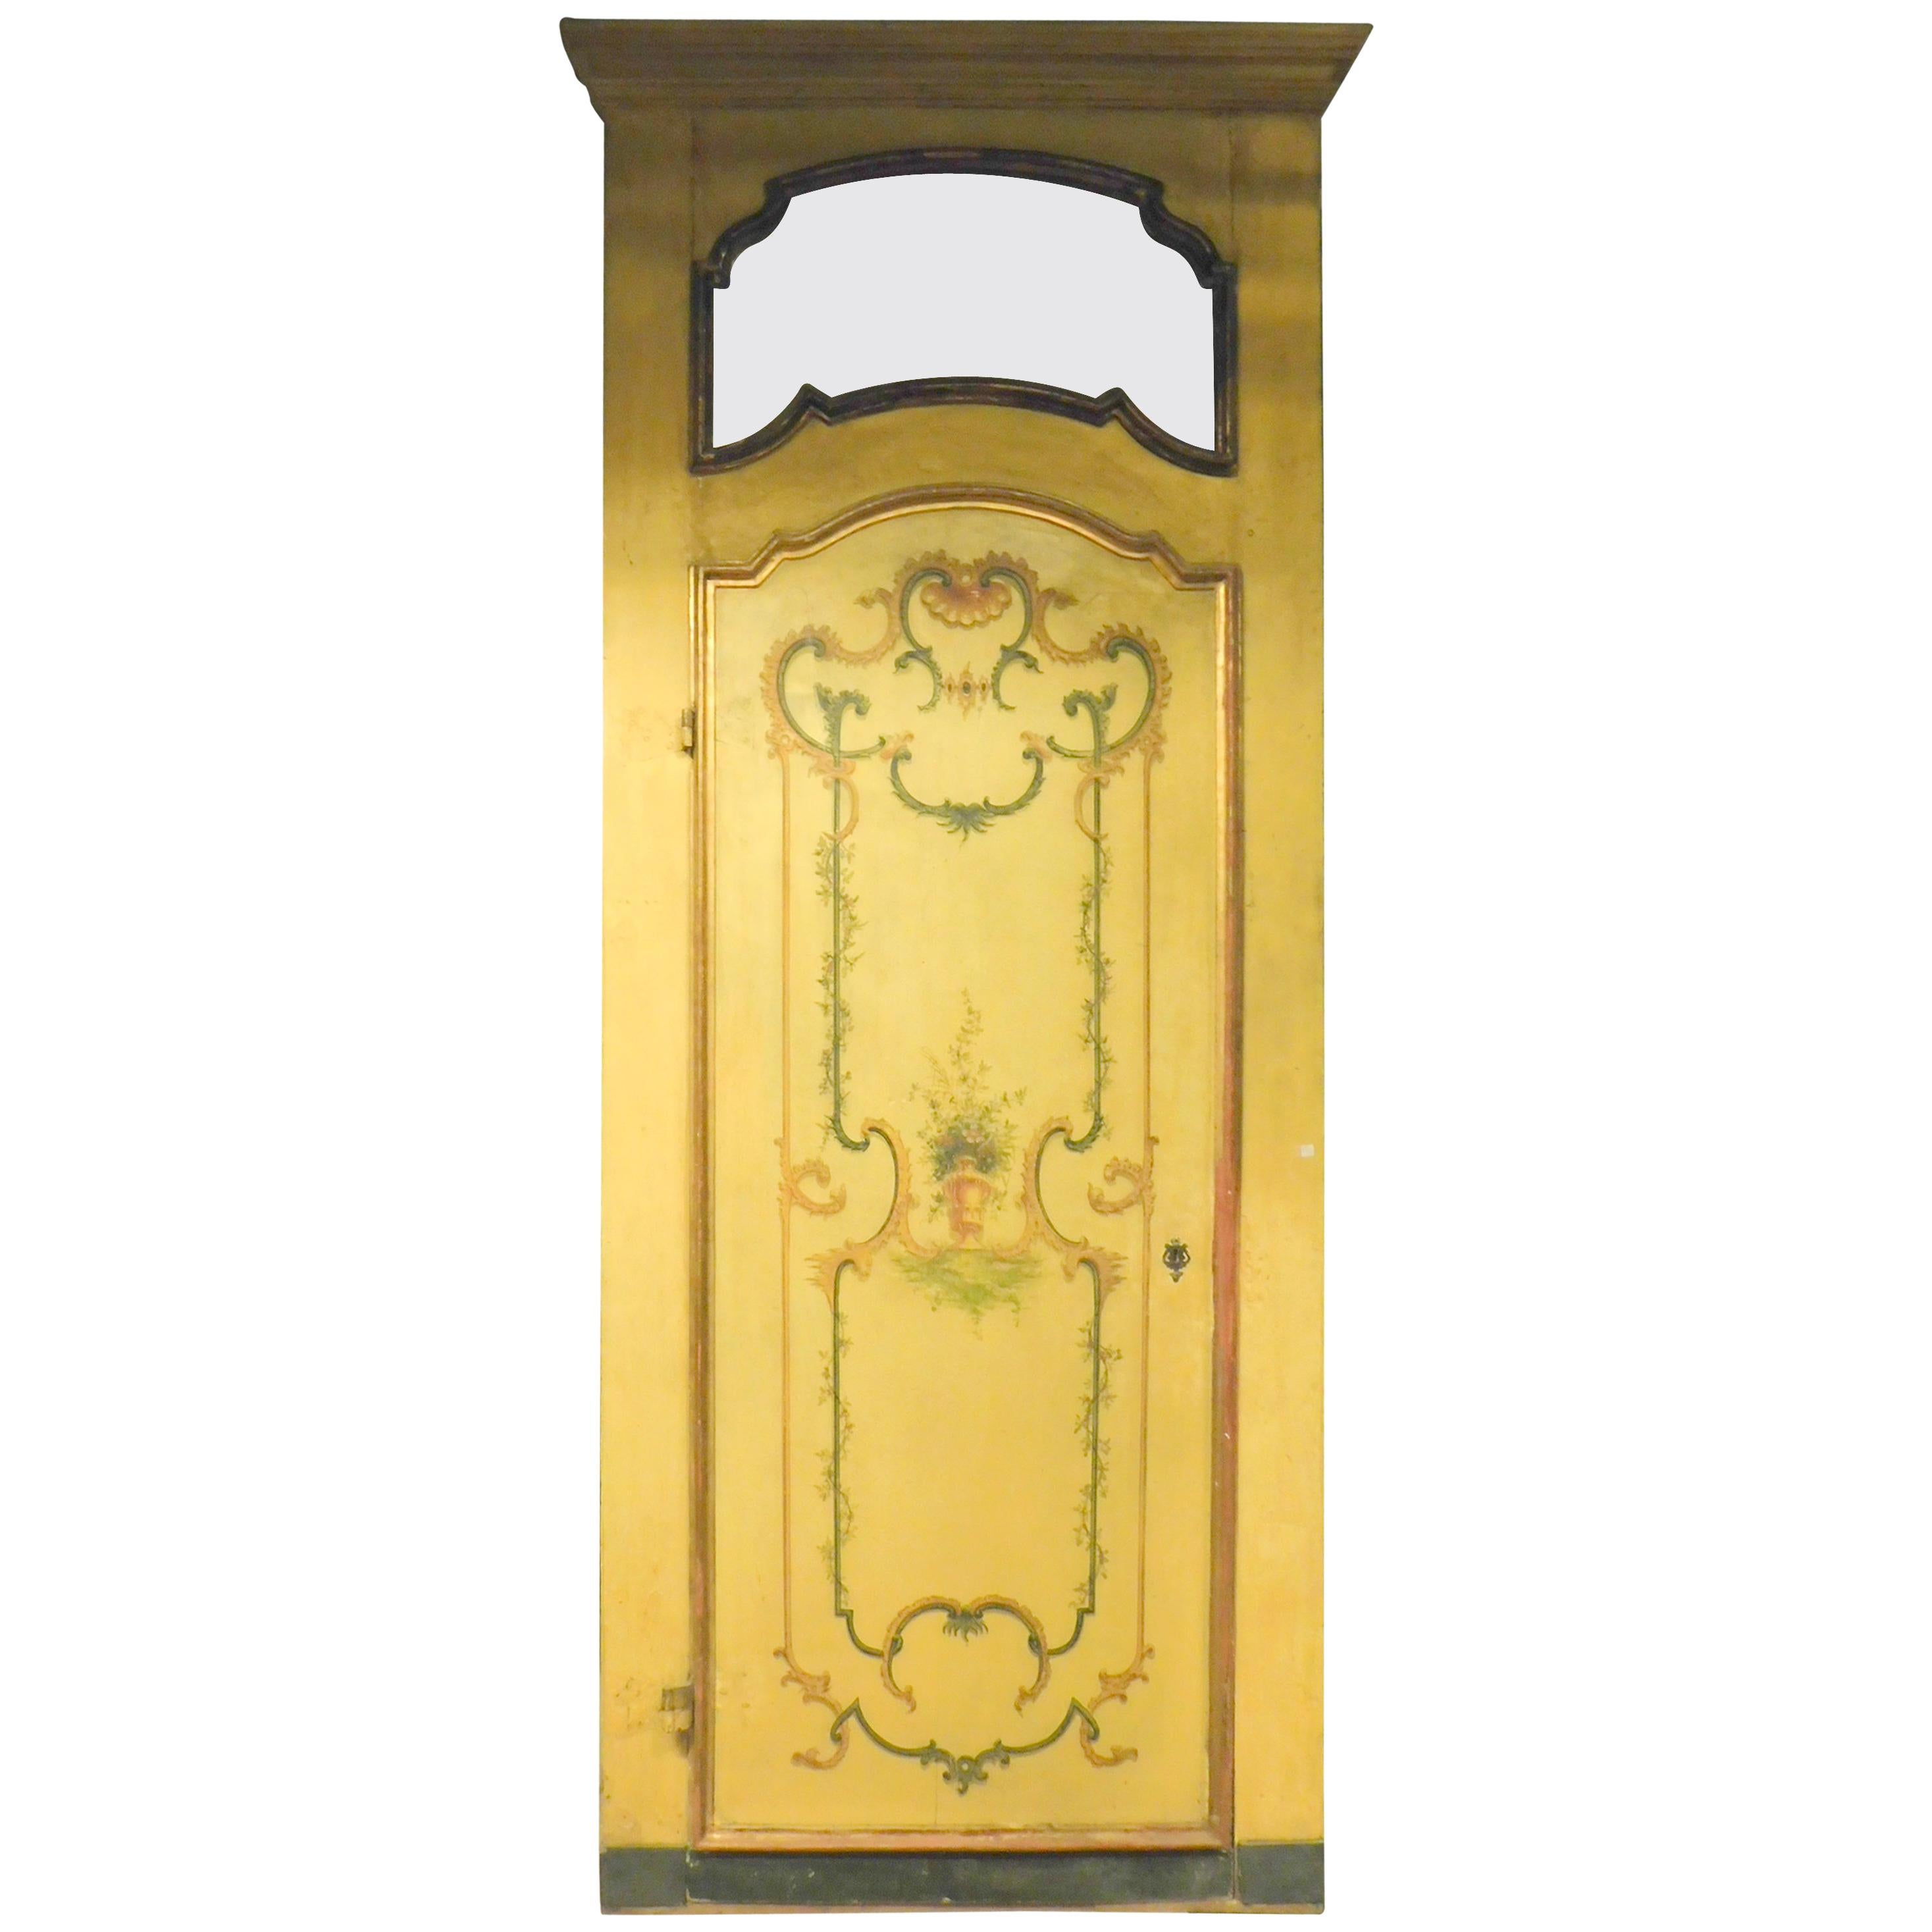 N. 3 Antique Yellow and Gold Lacquered Doors, Handmade Floral Painture, 1700